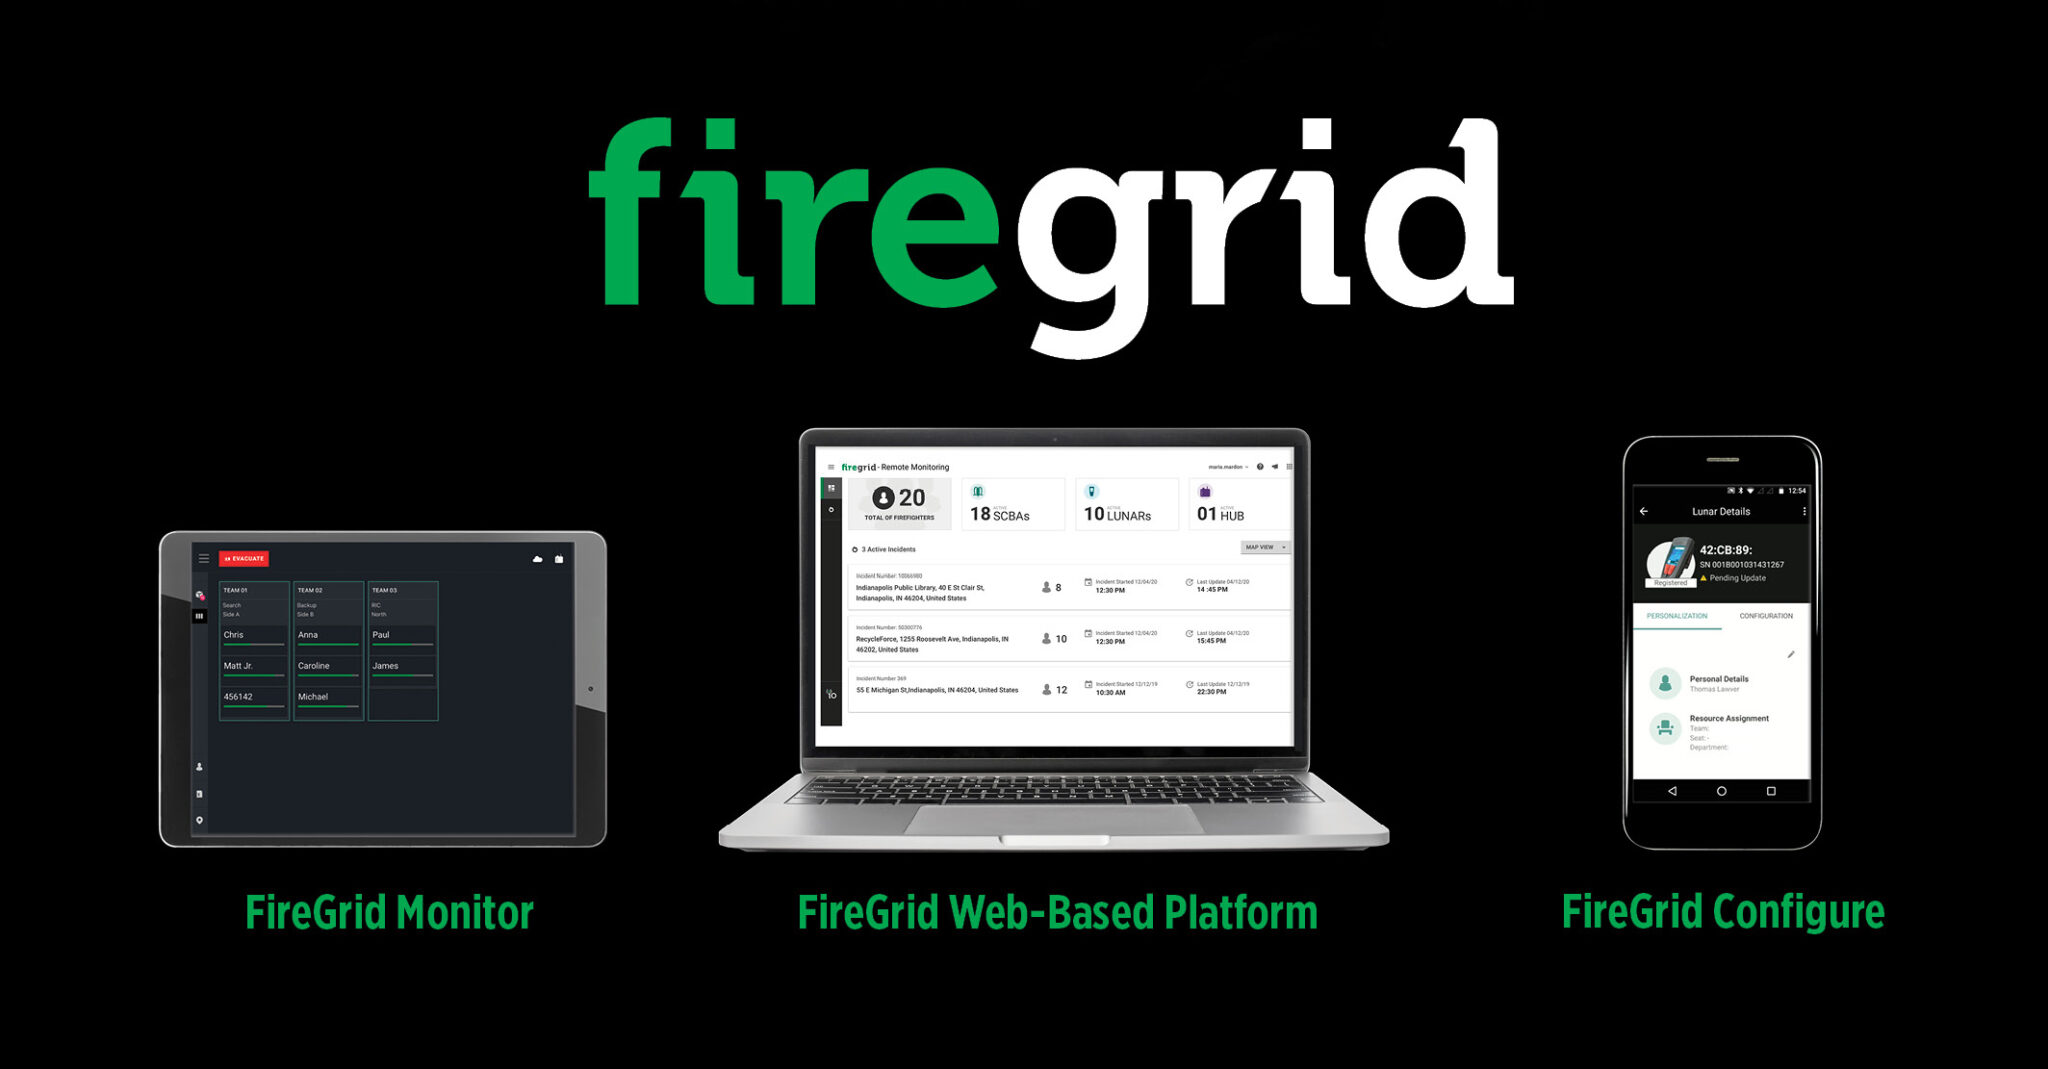 3-ISJ- FireGrid by MSA: Get the right information at the right time. One location for your information, accessible from anywhere